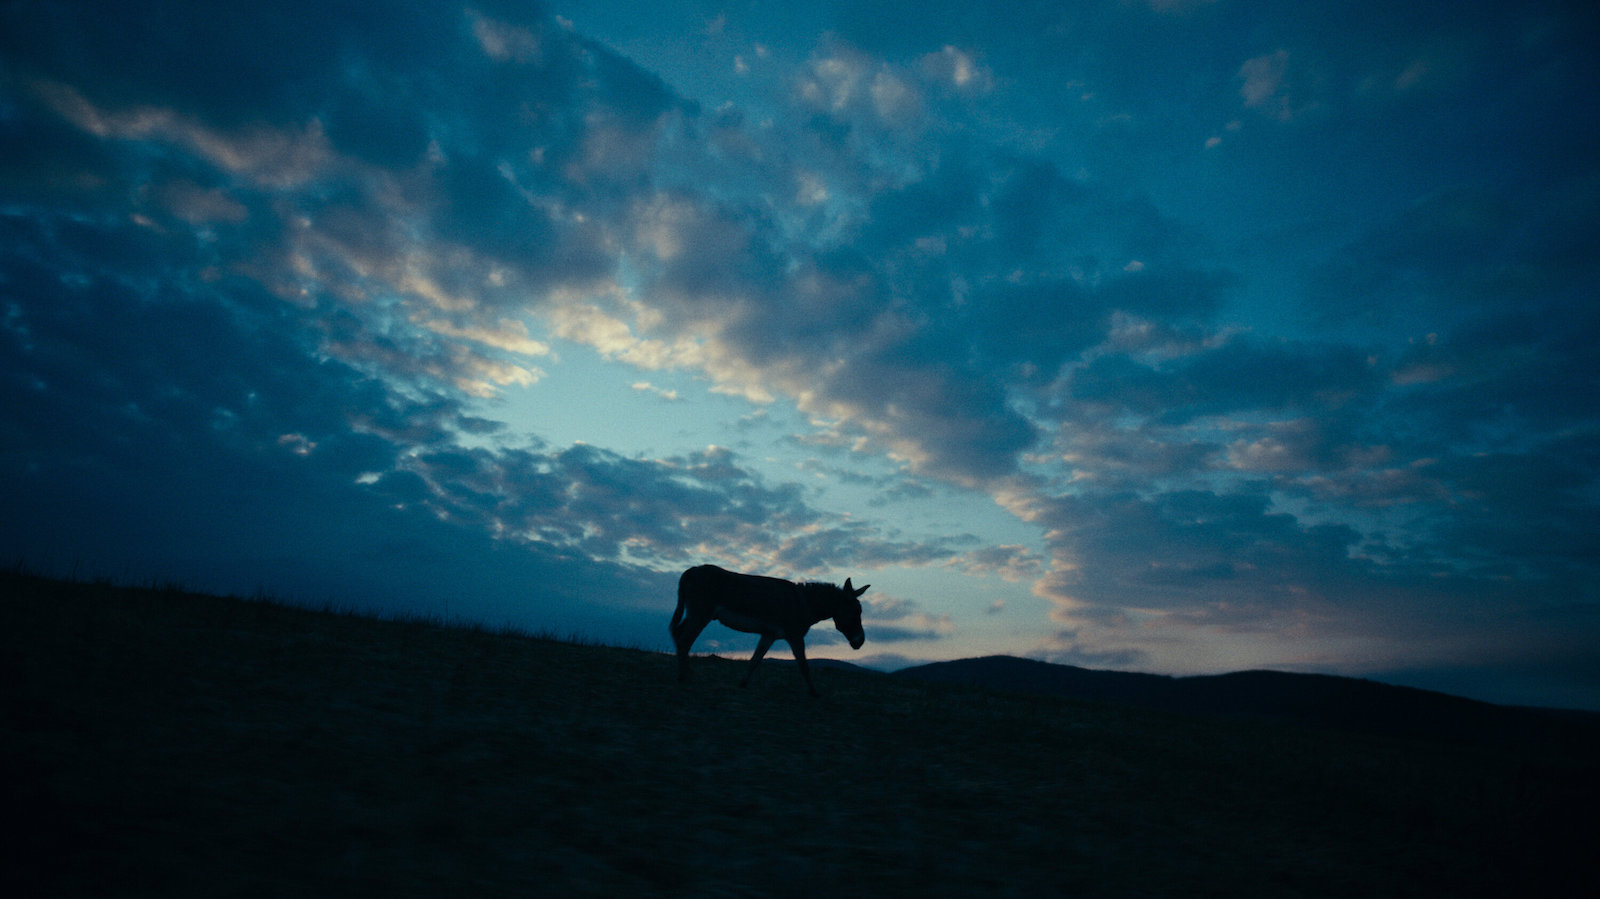 The silhouette of a donkey against a blue horizon